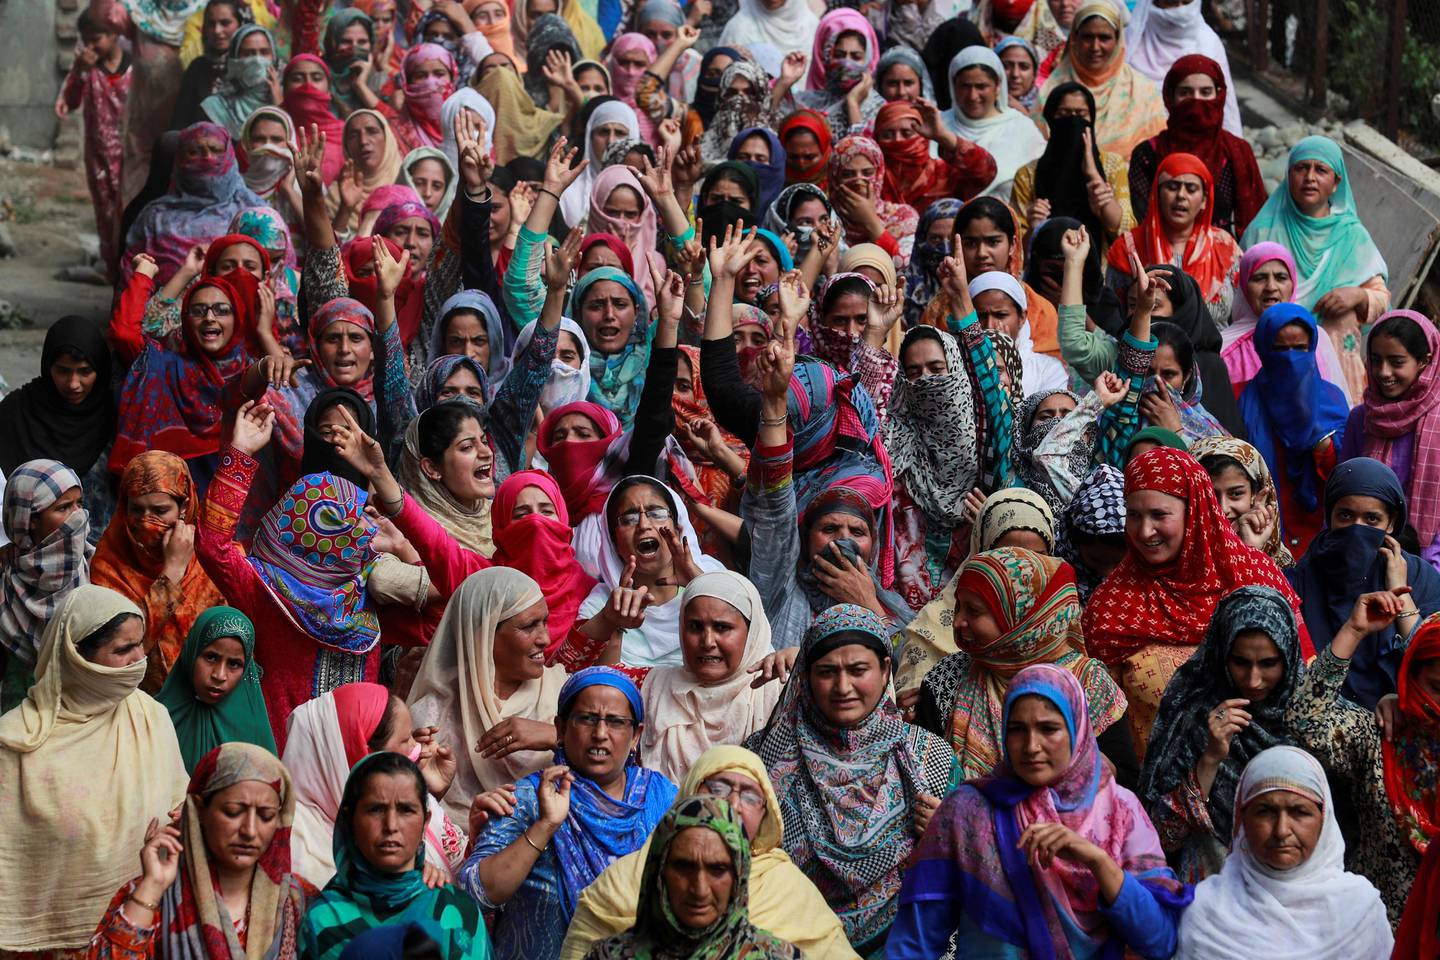 Kashmiri women shout slogans during a protest after the scrapping of the special constitutional status for Kashmir by the Indian government, in Srinagar, August 11, 2019. REUTERS/Danish Siddiqui